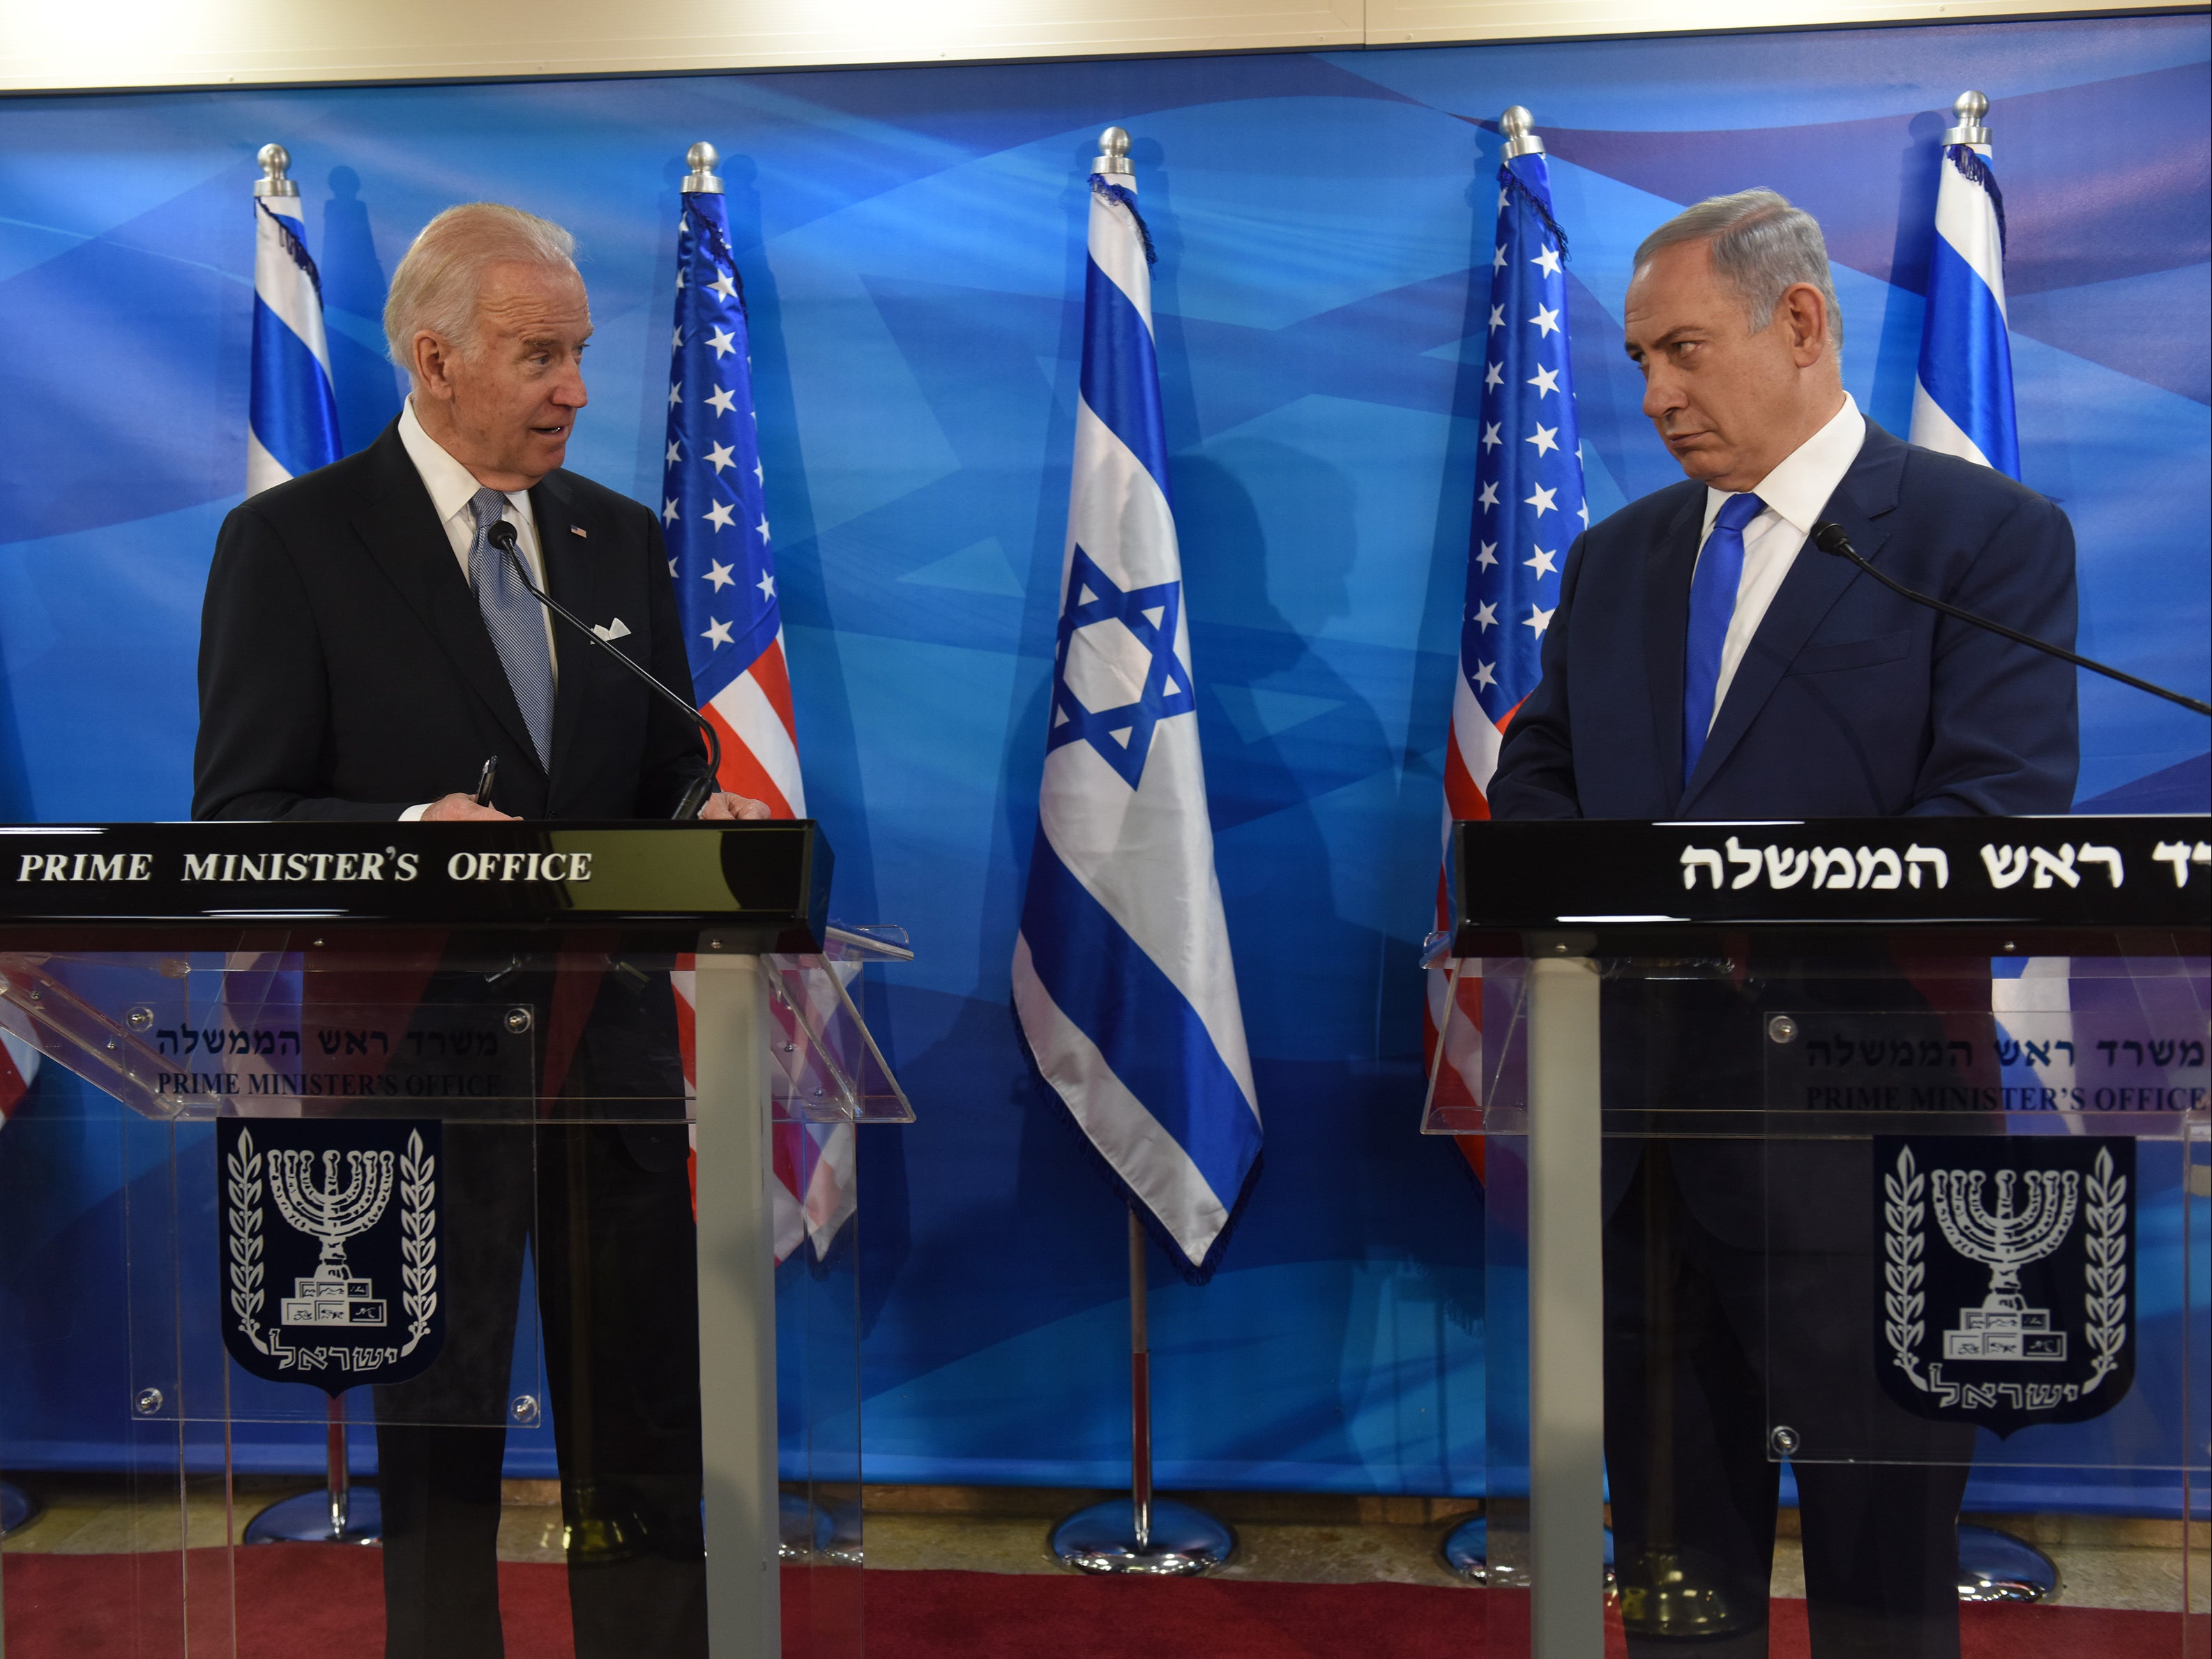 Then-Vice President Joe Biden and Israeli Prime Minister Benjamin Netanyahu give joint statements on March 9, 2016